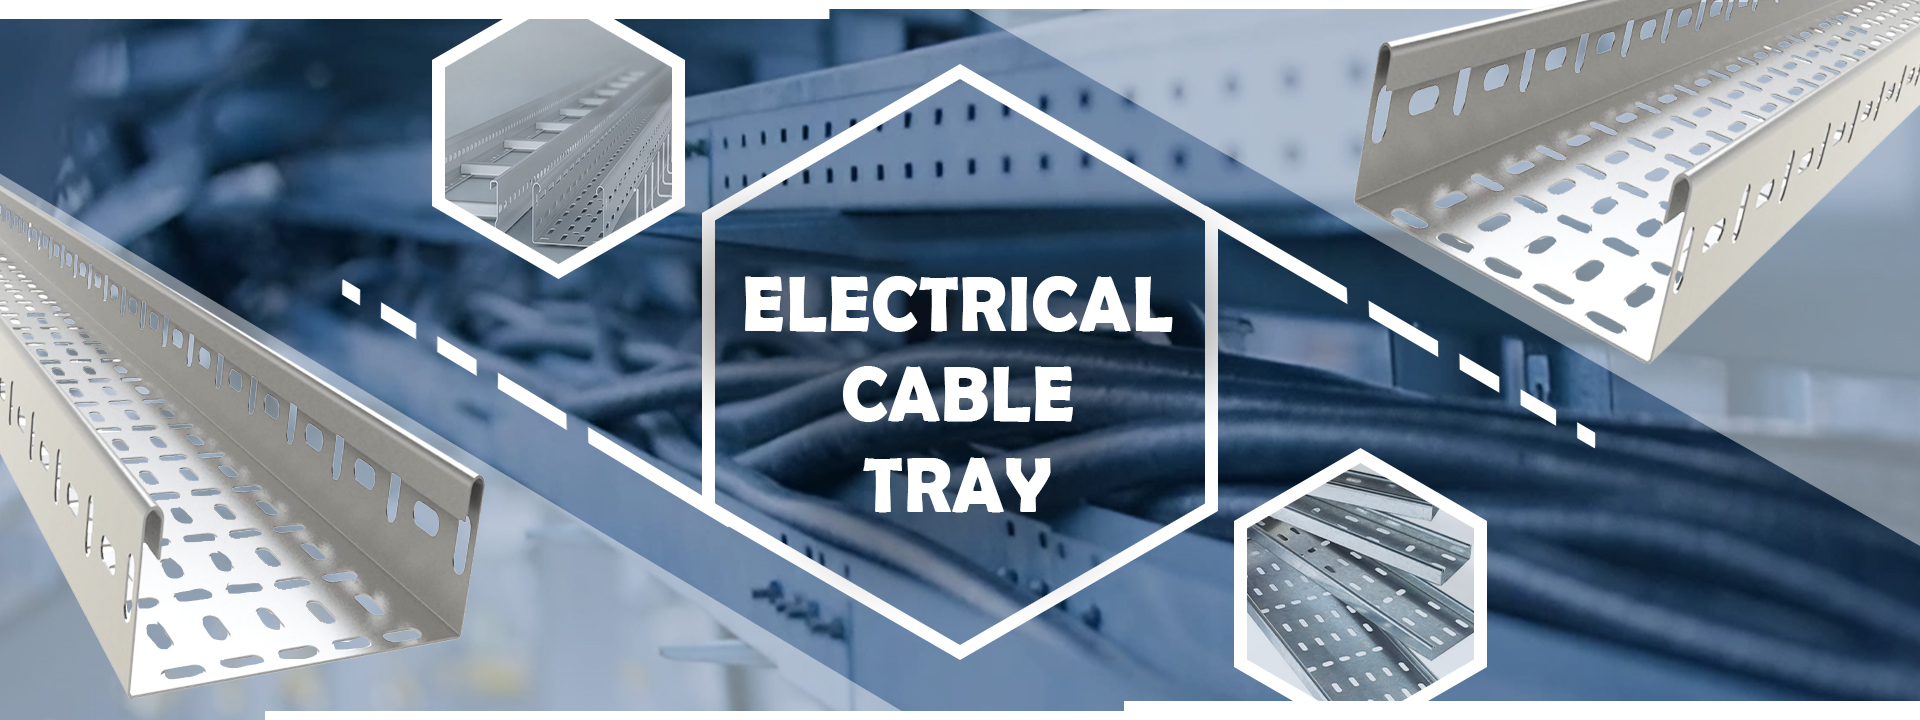 Electrical Cable Tray Manufacturers in Darbhanga